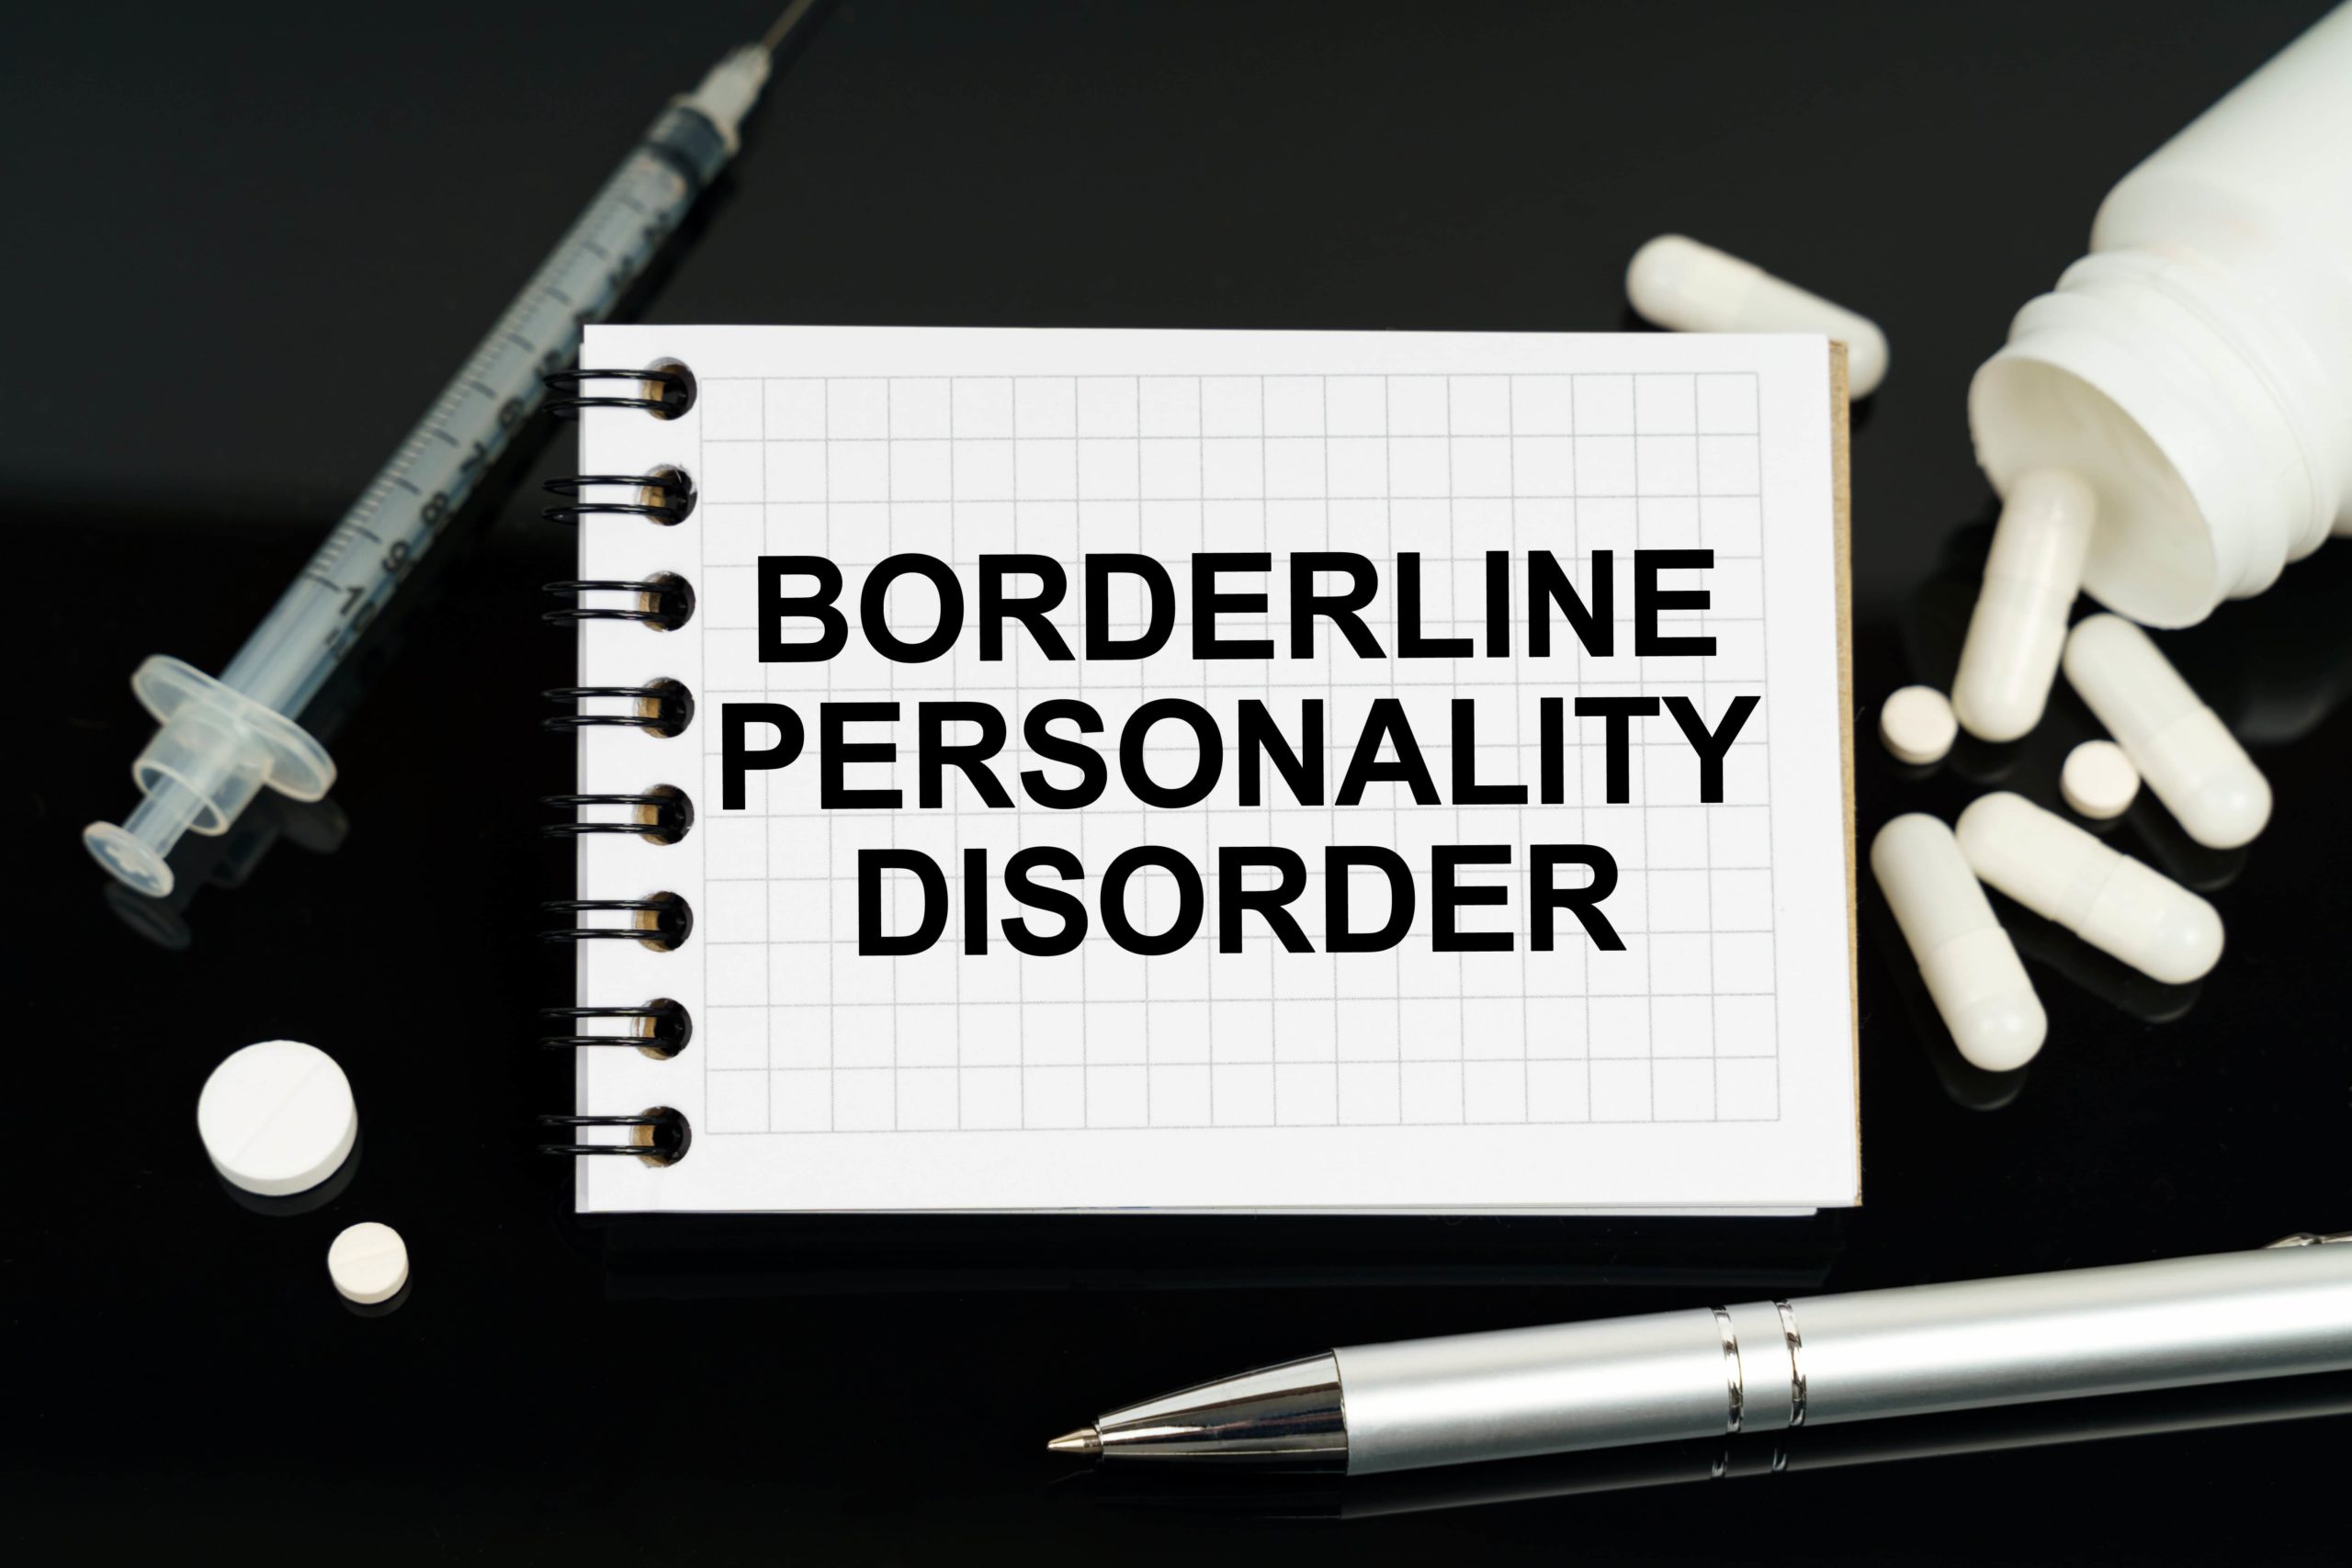 Is There A Link Between Borderline Personality Disorder and Addiction?